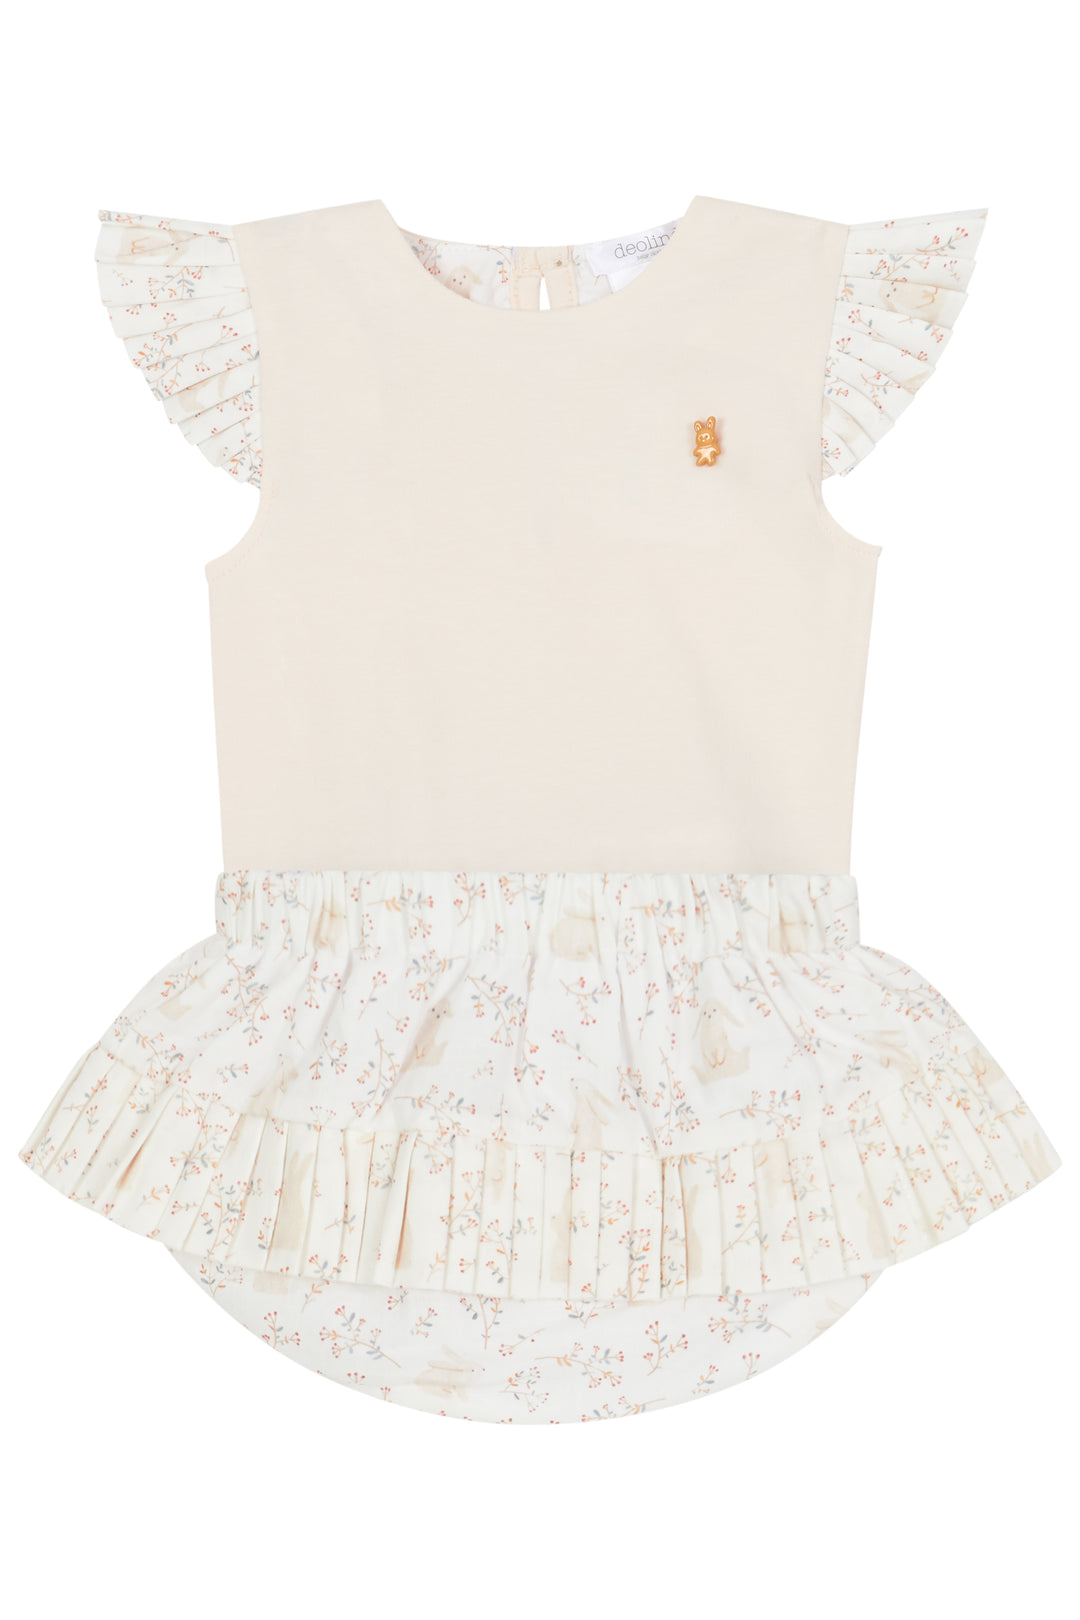 Deolinda "Genevieve" Peach Bunny Blouse & Bloomers | Millie and John